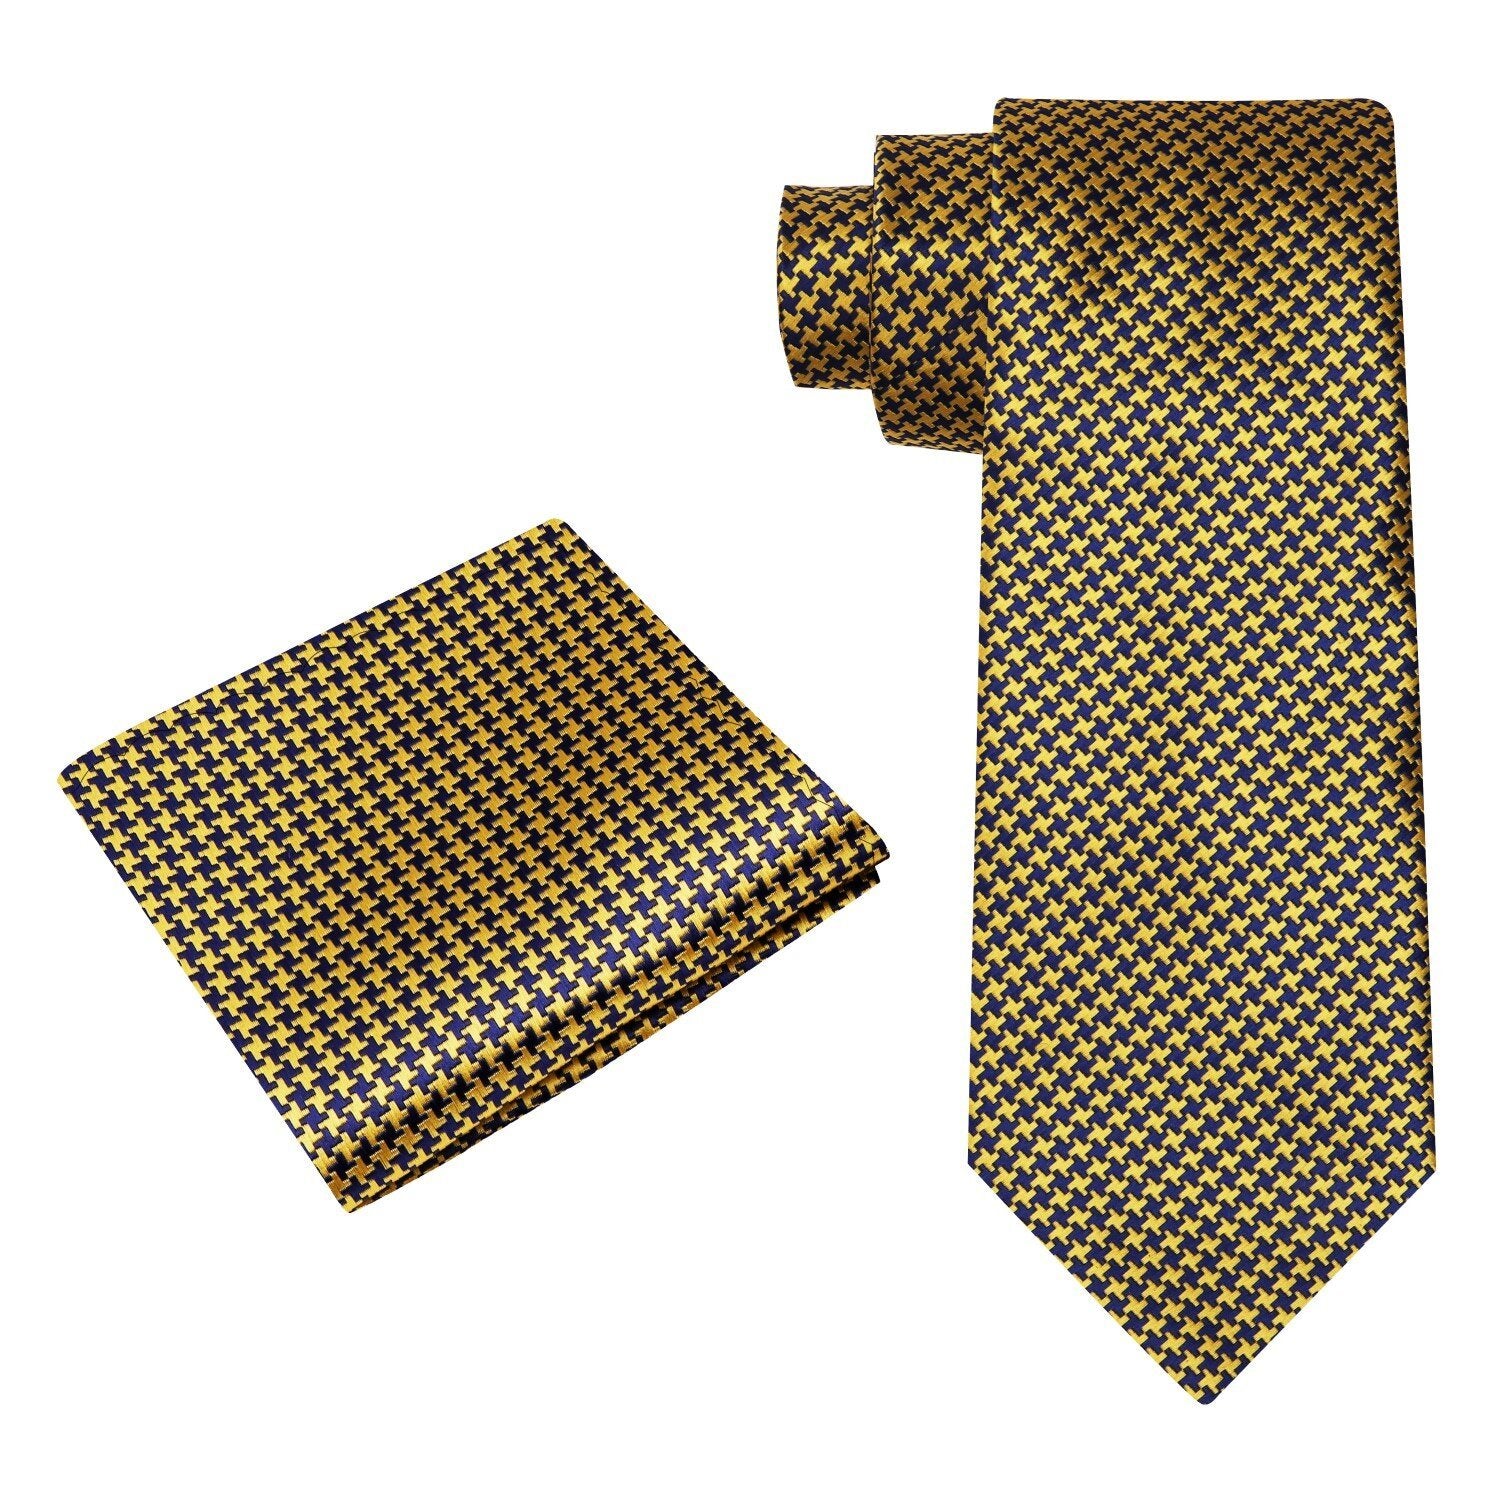 Alt View: Gold, Blue Hounds Tooth Tie and Pocket Square